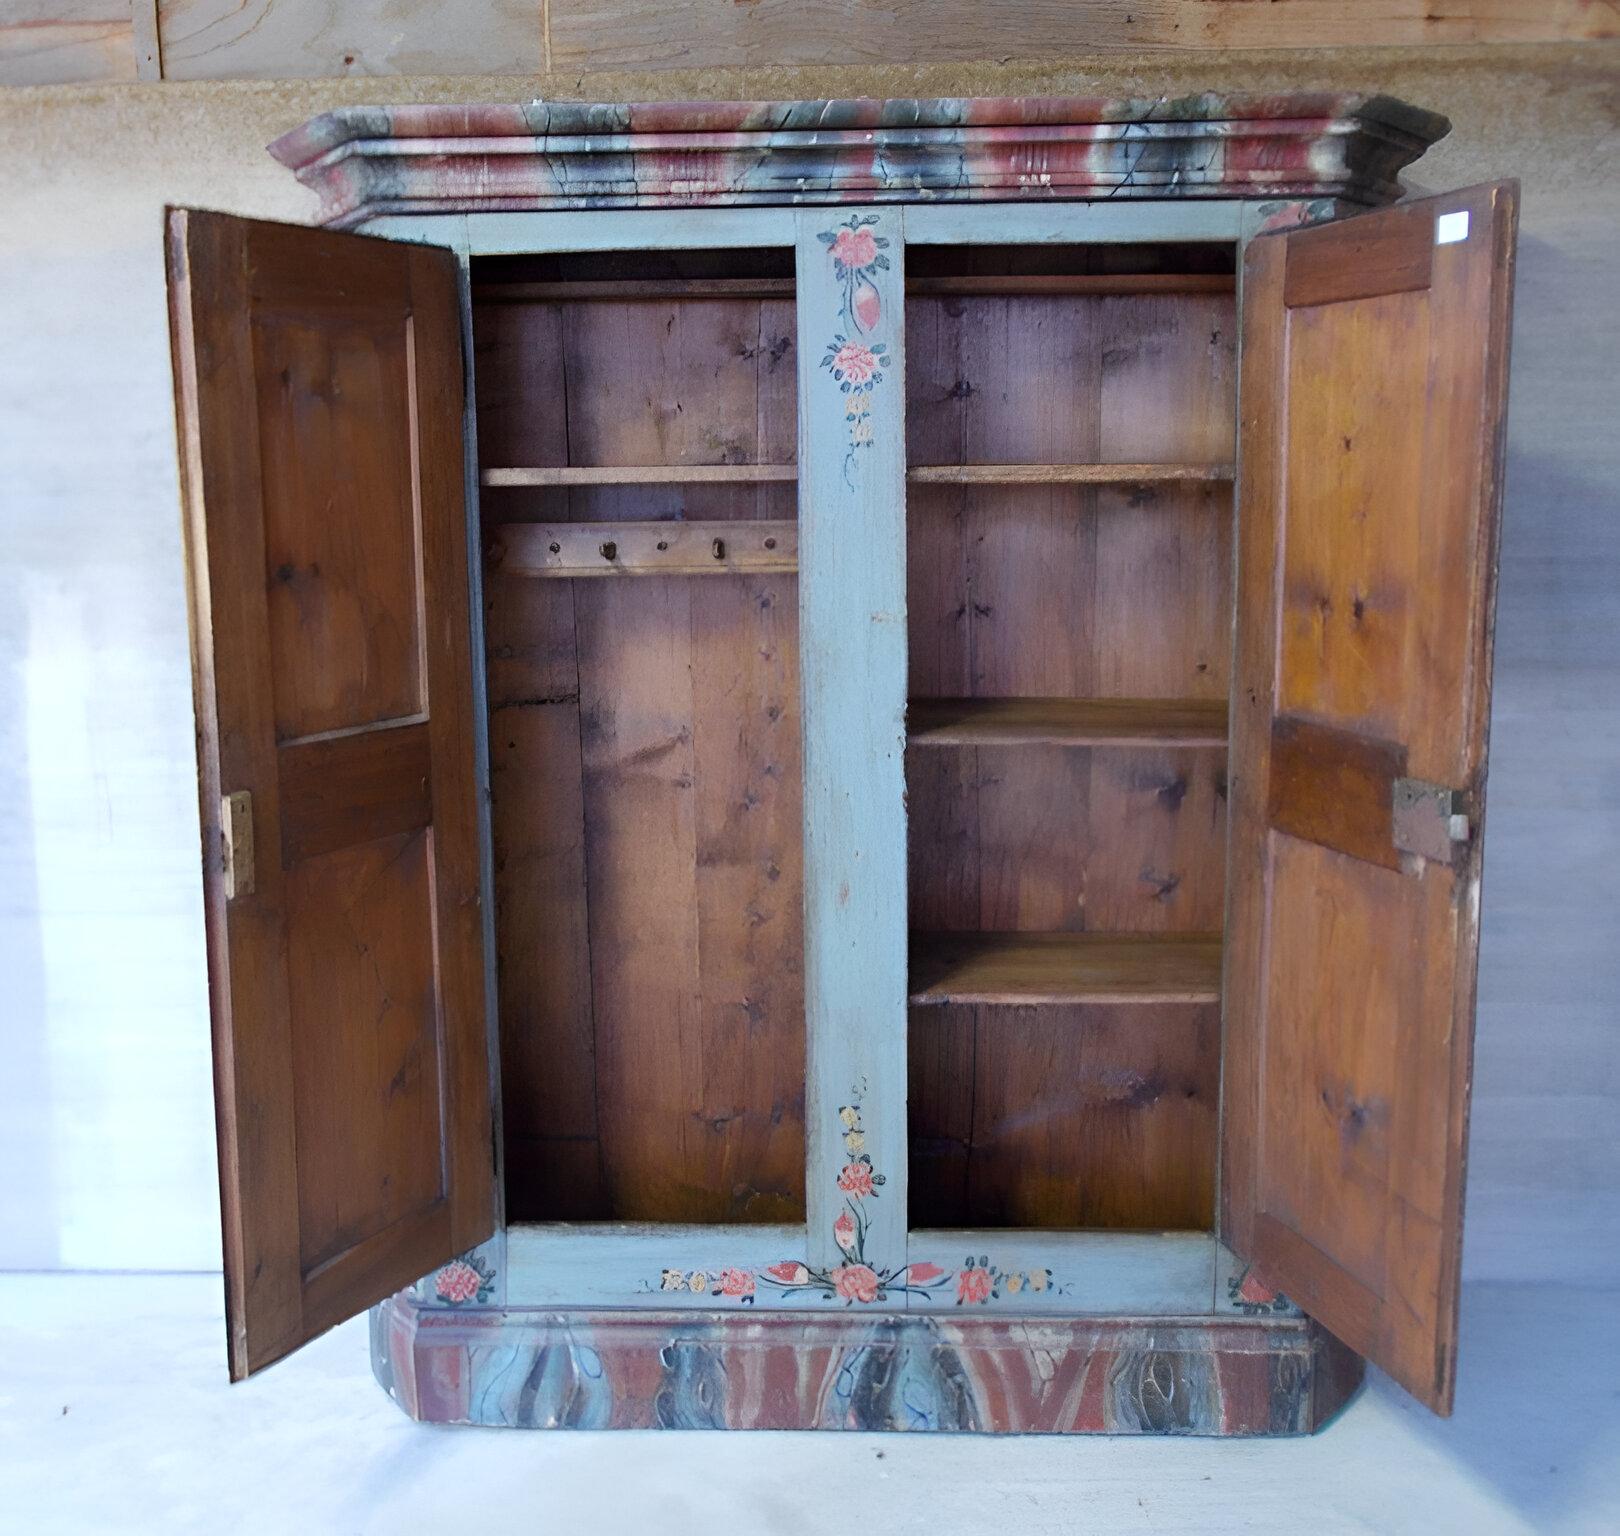 Spruce cabinet with shelves and coat rack.
Original hardware of the period complete with opening latch on left sash.

Between the 2 doors is a pilaster with floral motifs.

Frame and base are decorated with faux marble in various colors.

Of limited